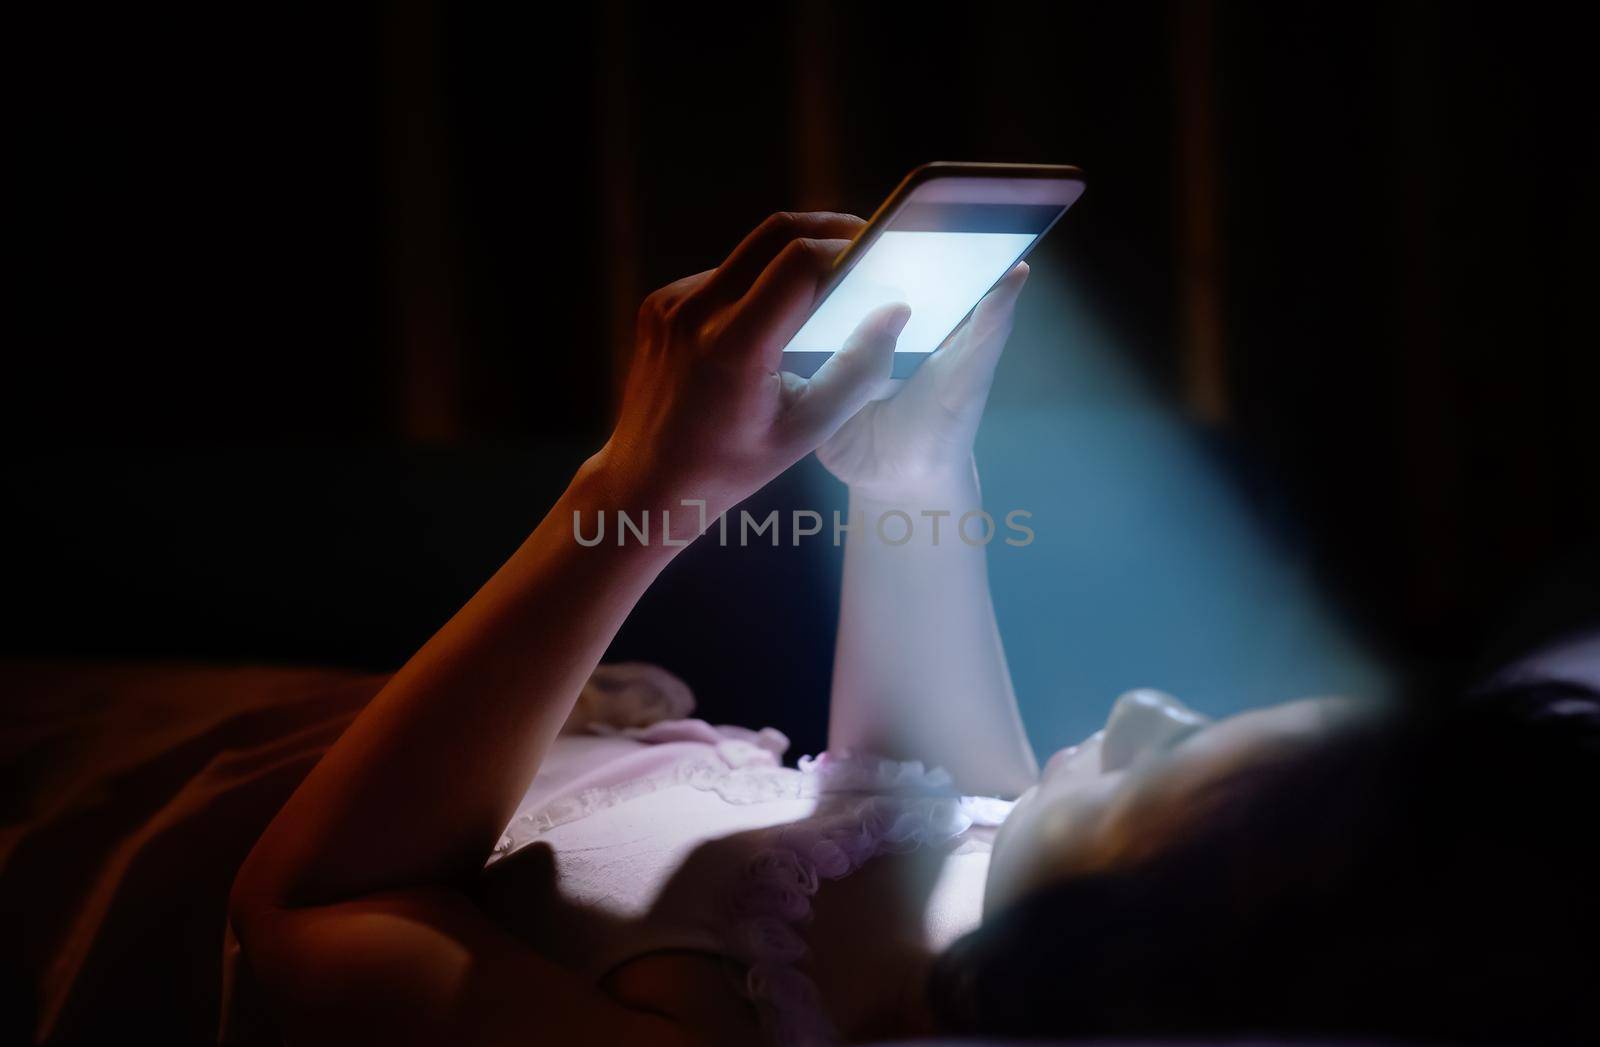 Blue Light from Your Phone at Night Damaging Your Eyes by toa55